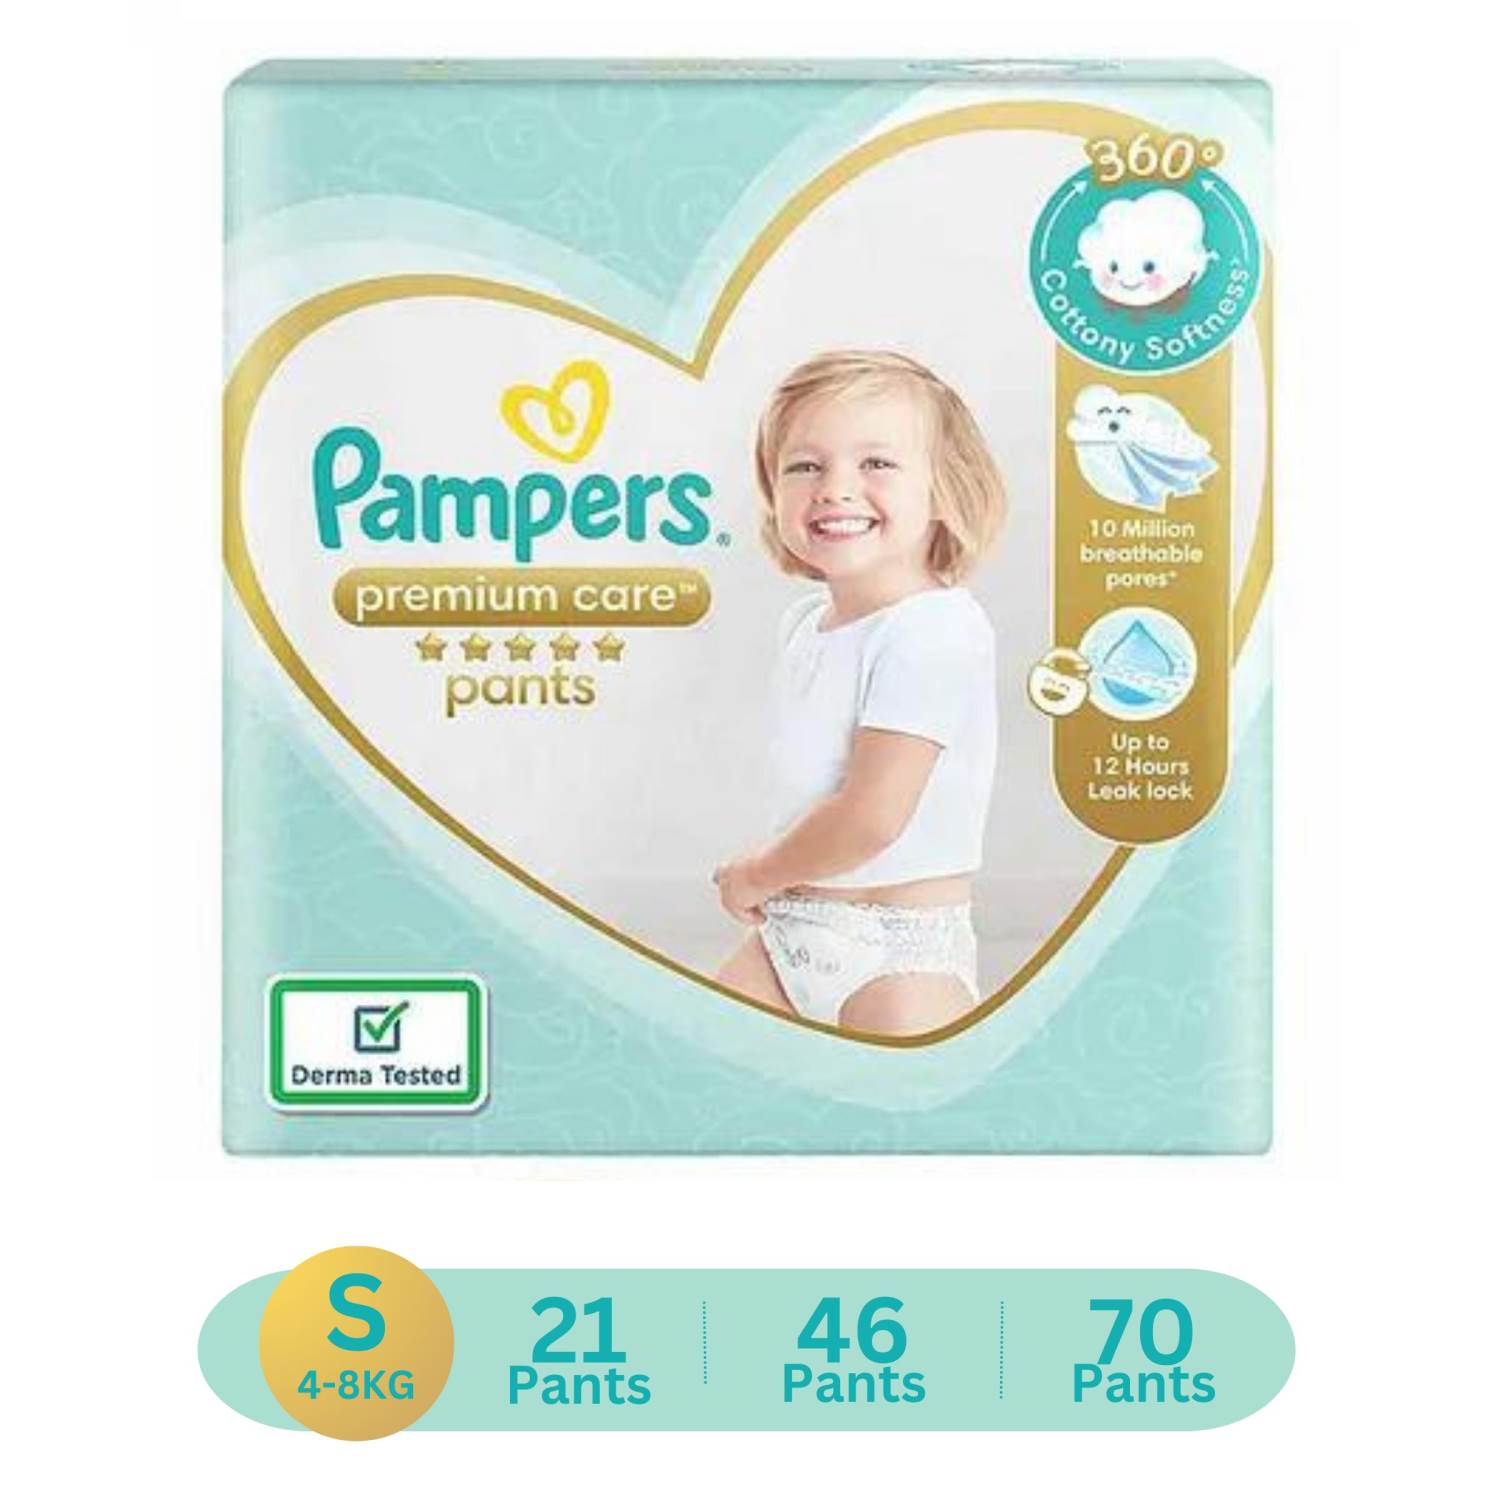 Pampers Premium Care Pants, Small size baby diapers (SM) Softest ever pants SMILE BABY